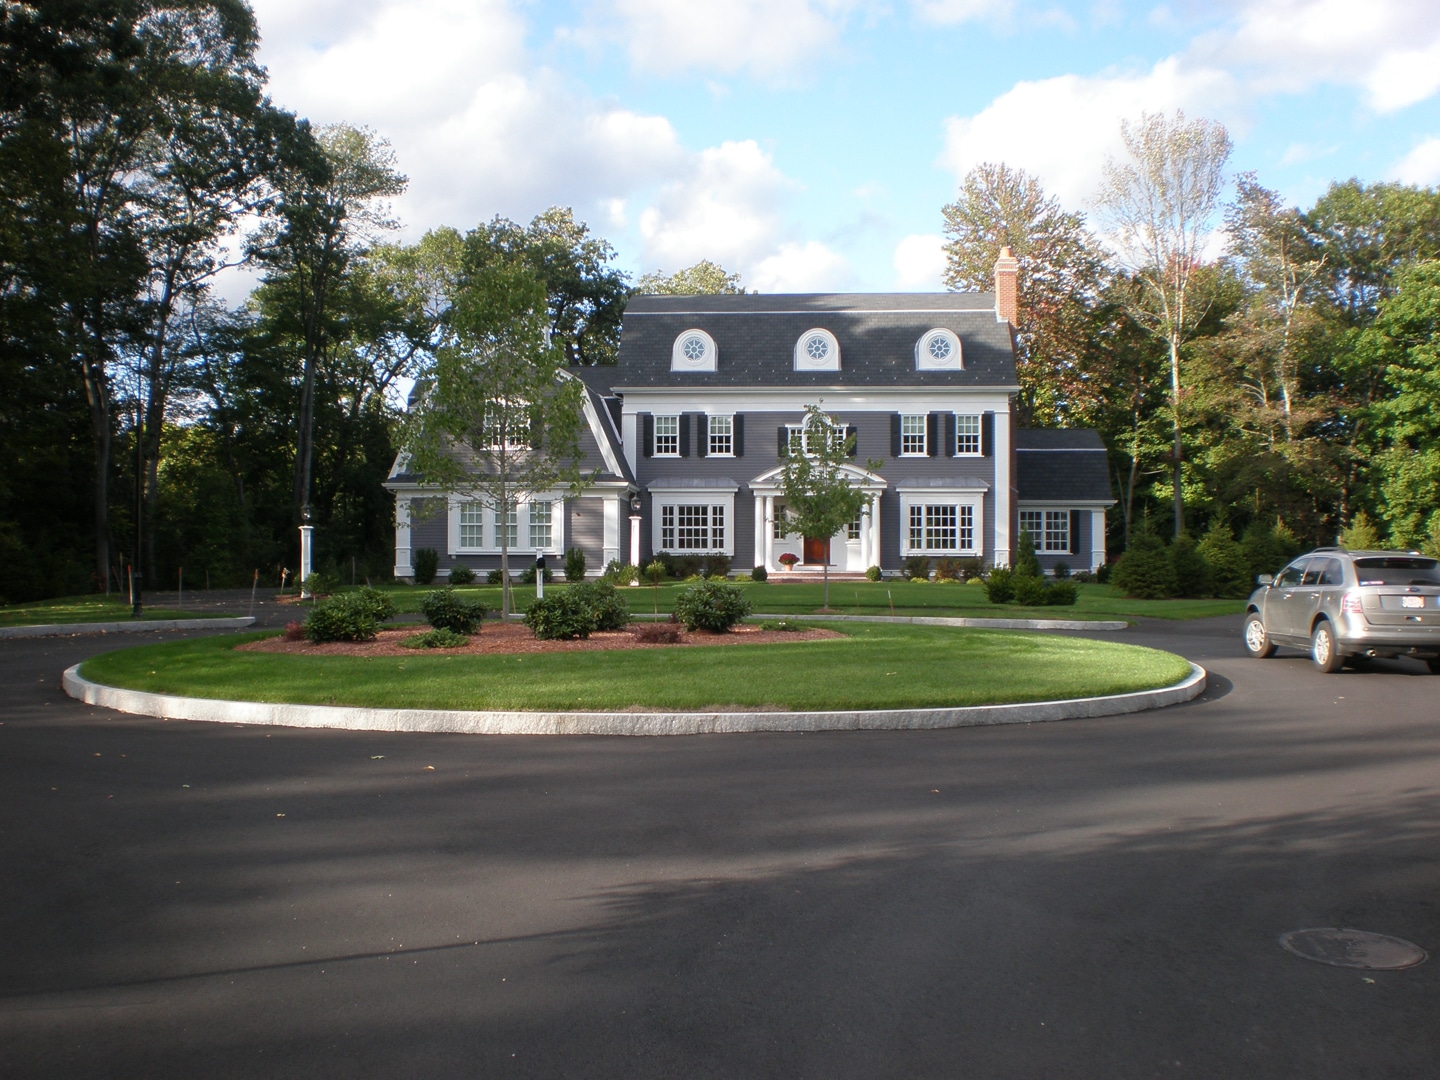 Paving Company in Reading, MA